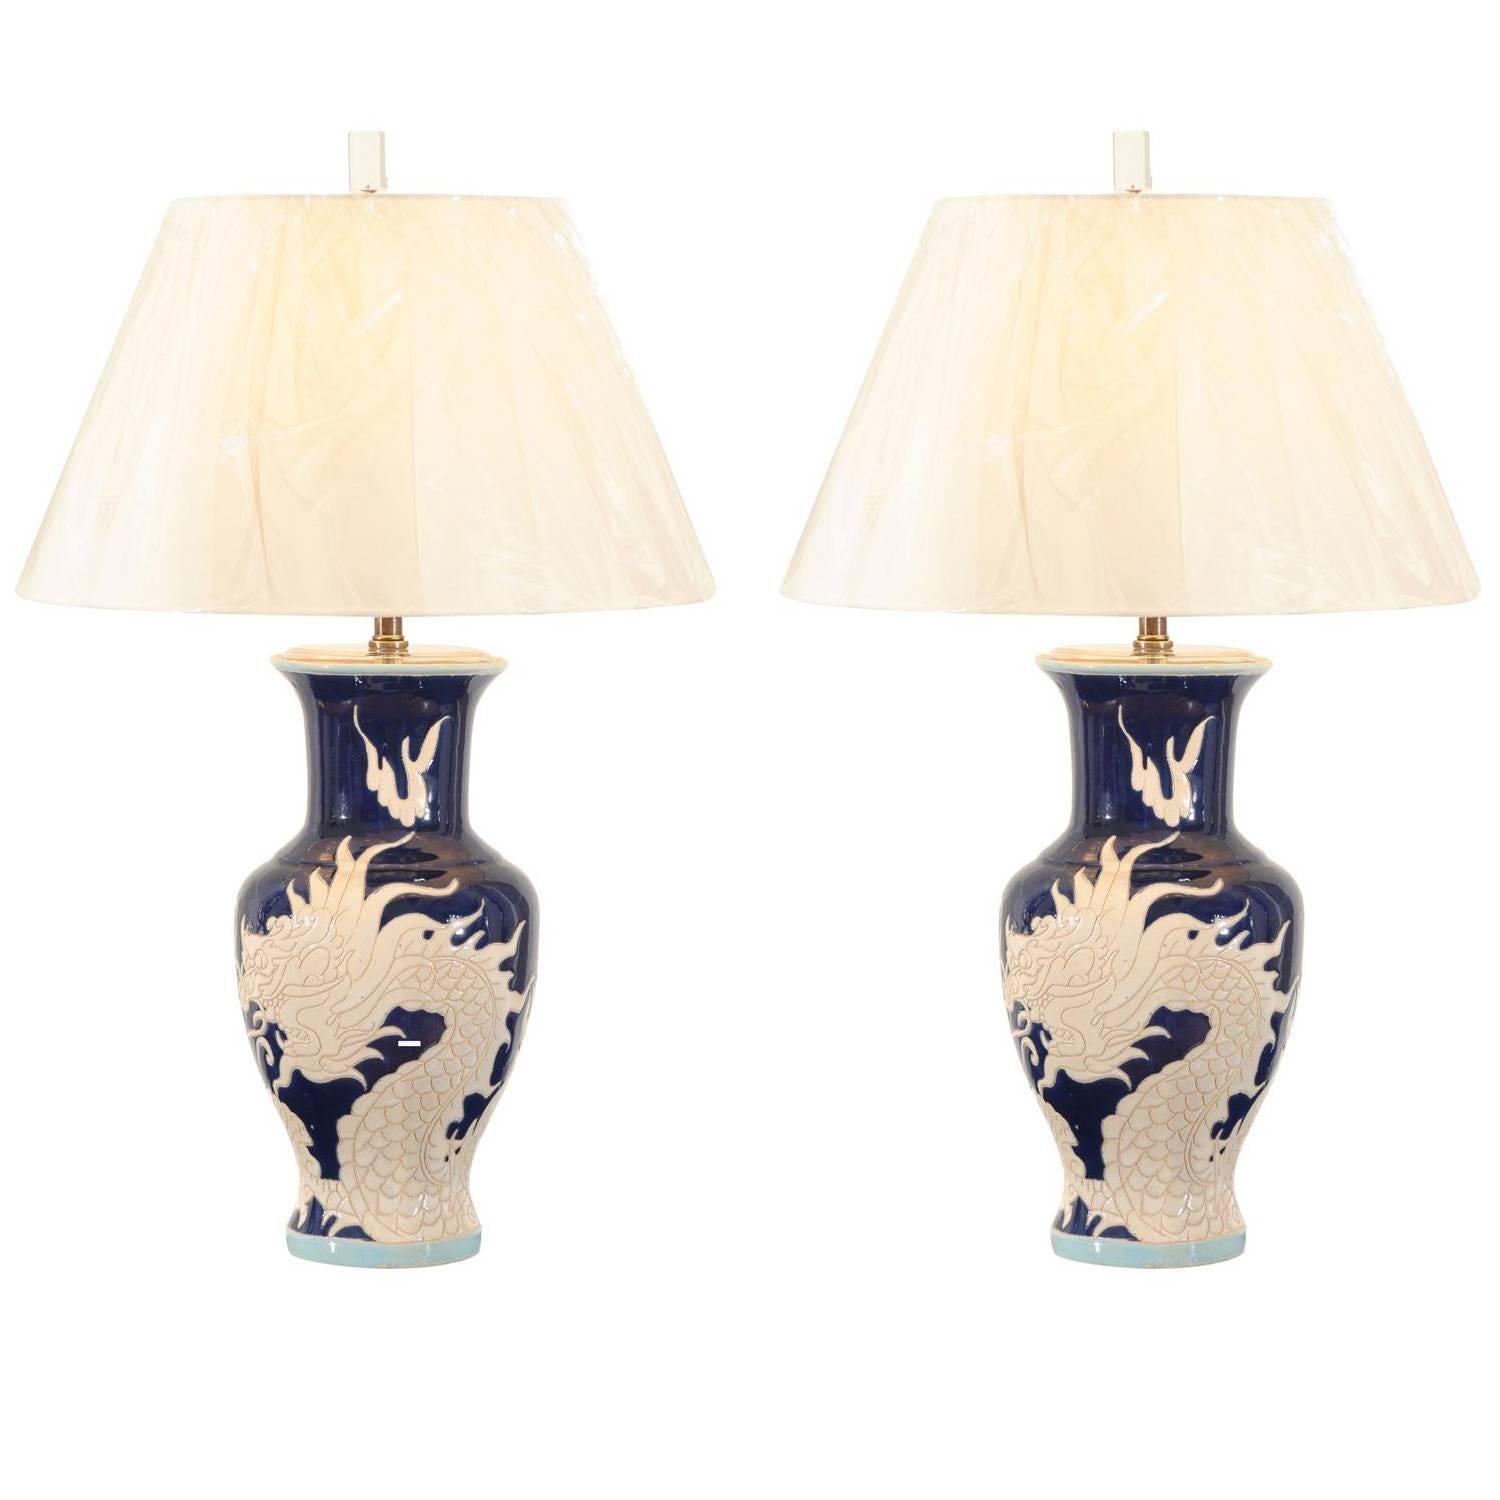 Restored Pair of Dramatic Vintage Dragon Lamps in Cobalt and Cream